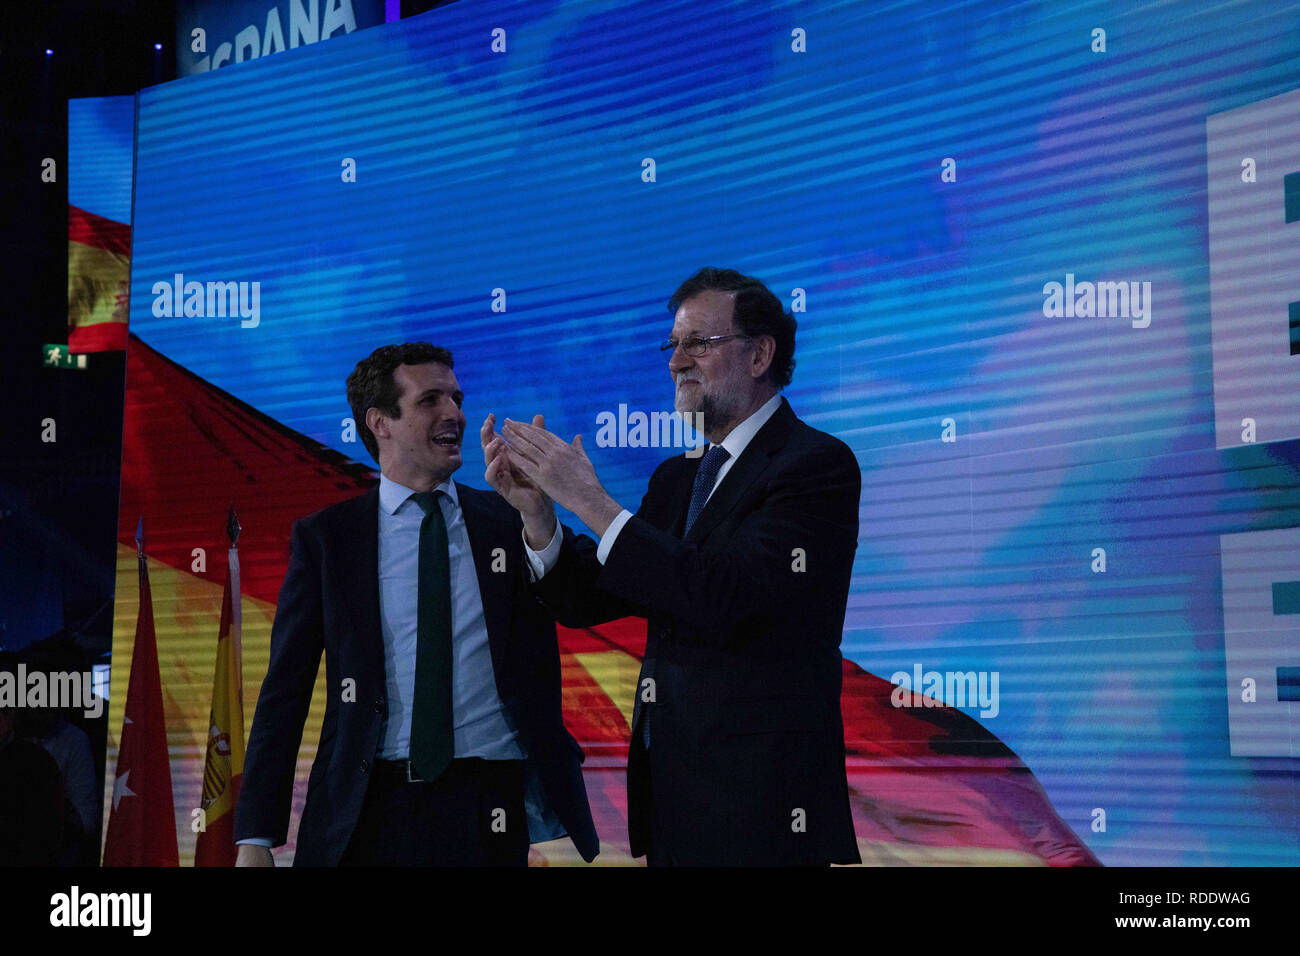 January 18, 2019 - Madrid, Spain - Pablo Casado and Mariano Rajoy attending the act. The PP celebrates its national convention to establish the main lines of its electoral program for the three elections scheduled for May 26 and are key to gauge the leadership of the popular president, Pablo Casado. (Credit Image: © Jesus Hellin/ZUMA Wire) Stock Photo